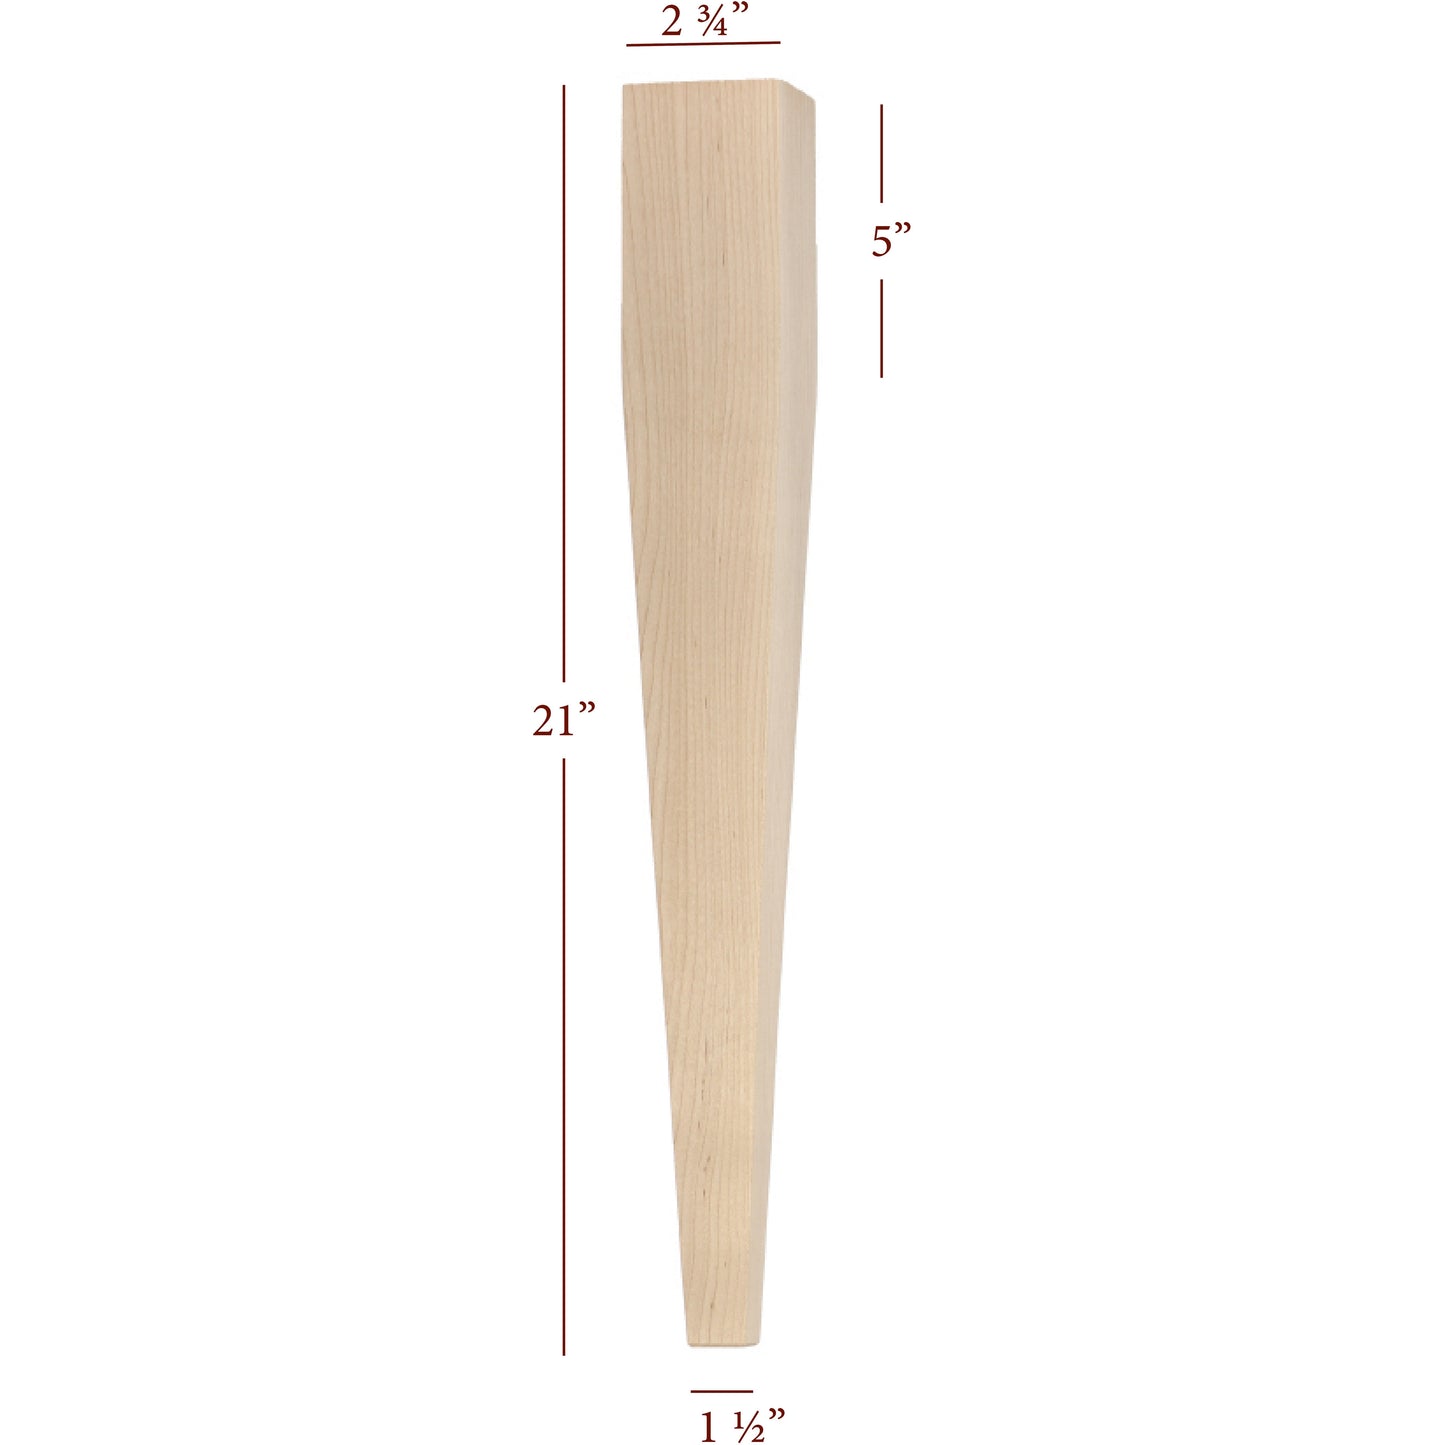 Large Four Sided Taper End Table Leg